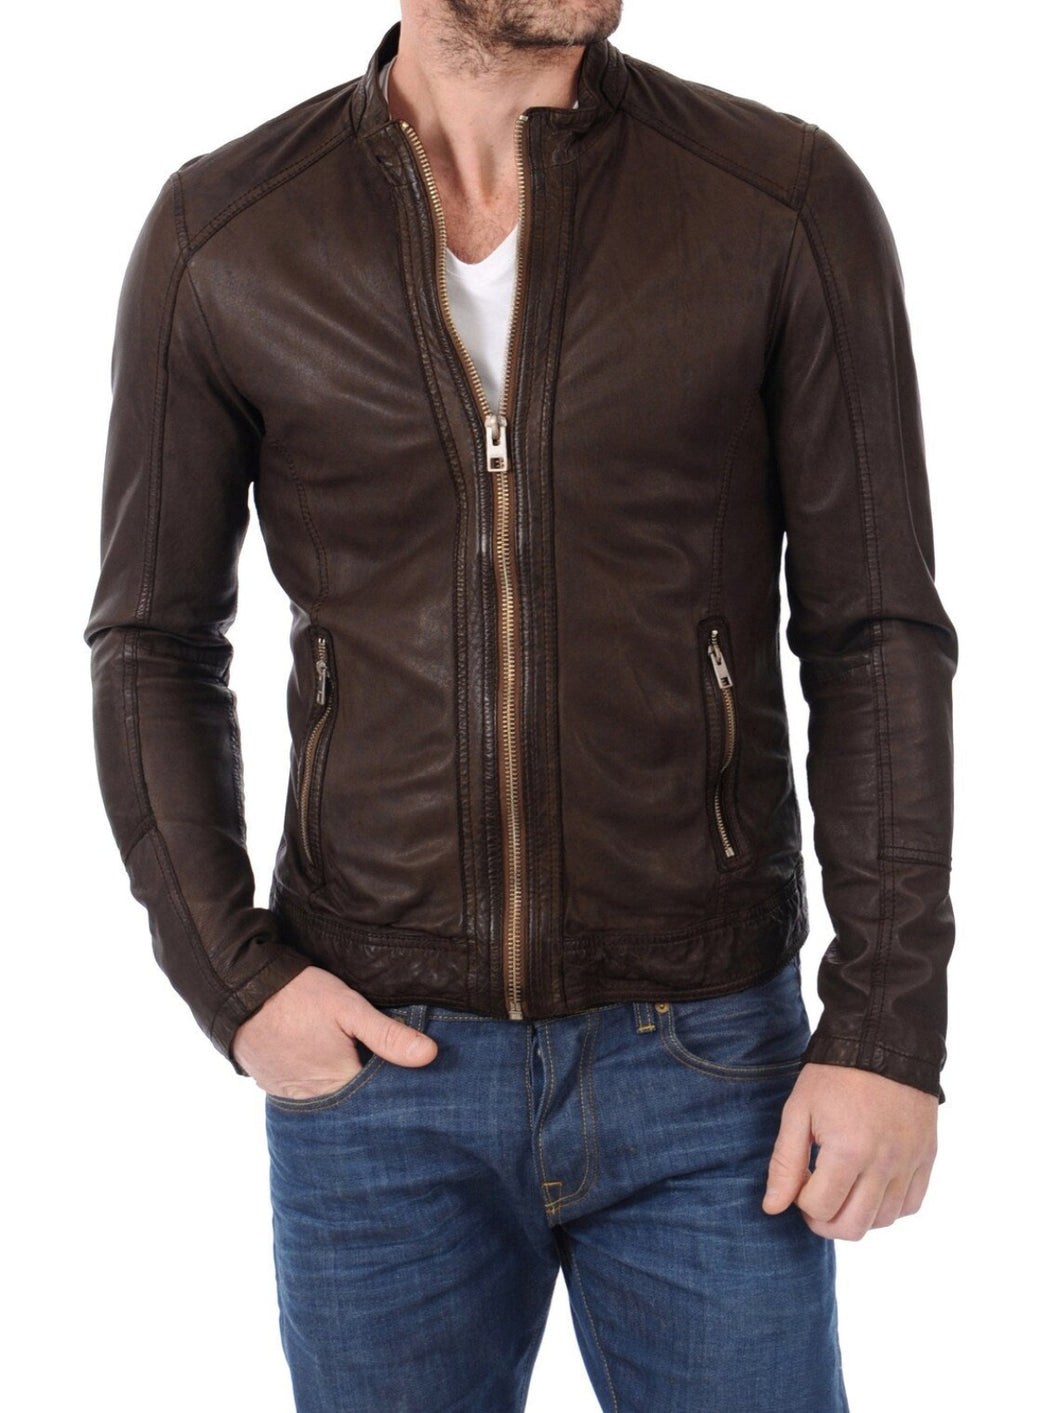 Mens Stylish Brown Real Leather Jacket